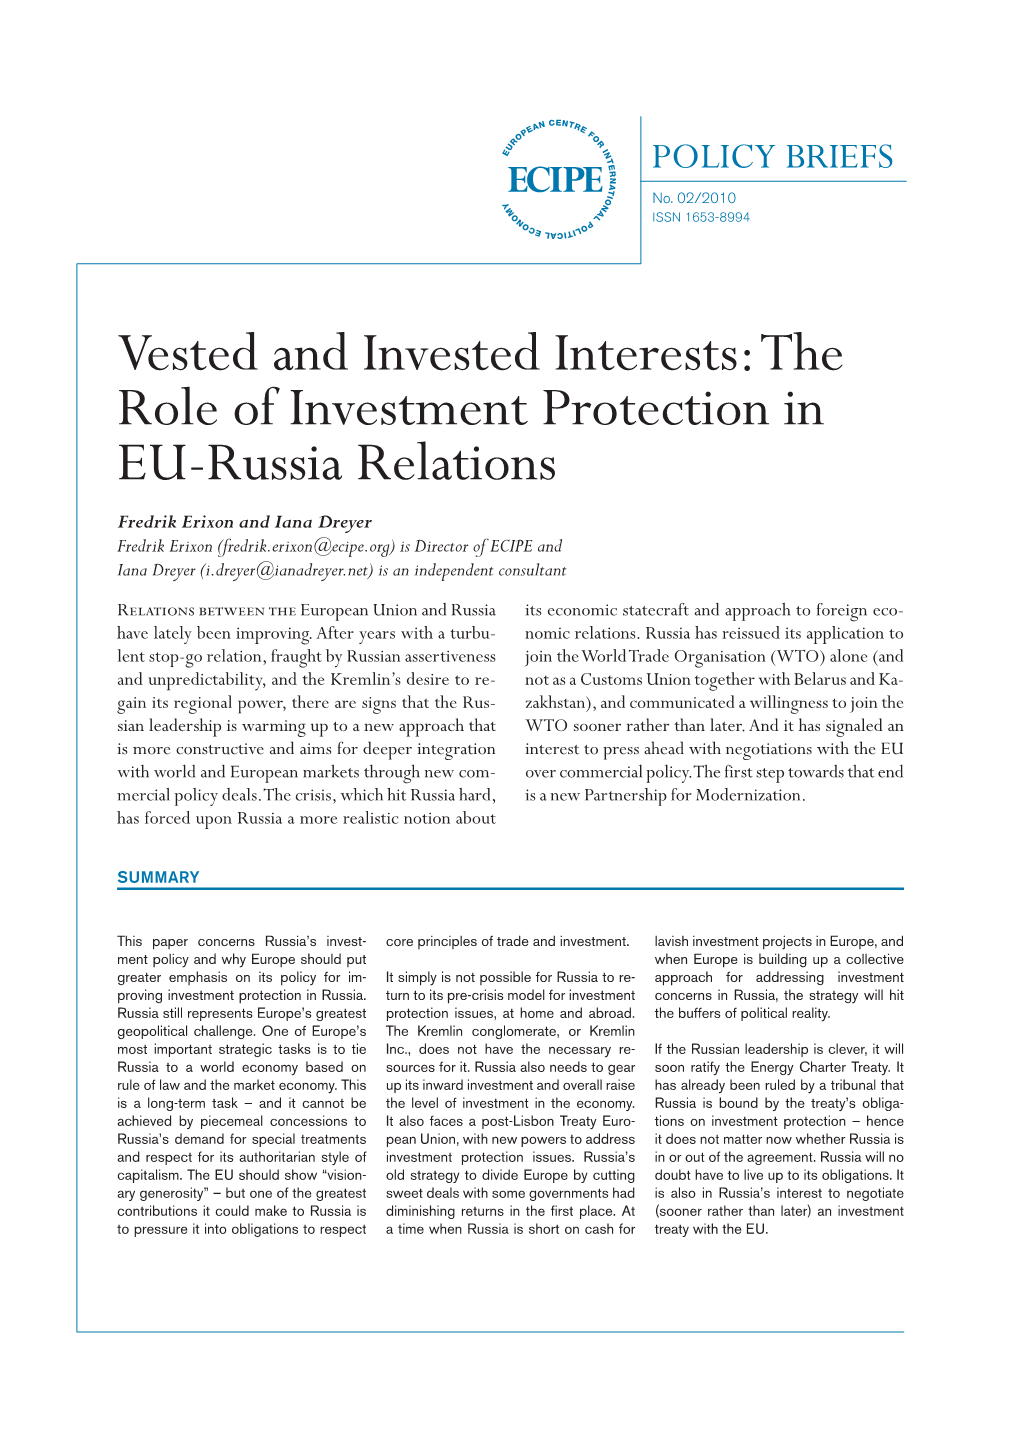 The Role of Investment Protection in EU-Russia Relations